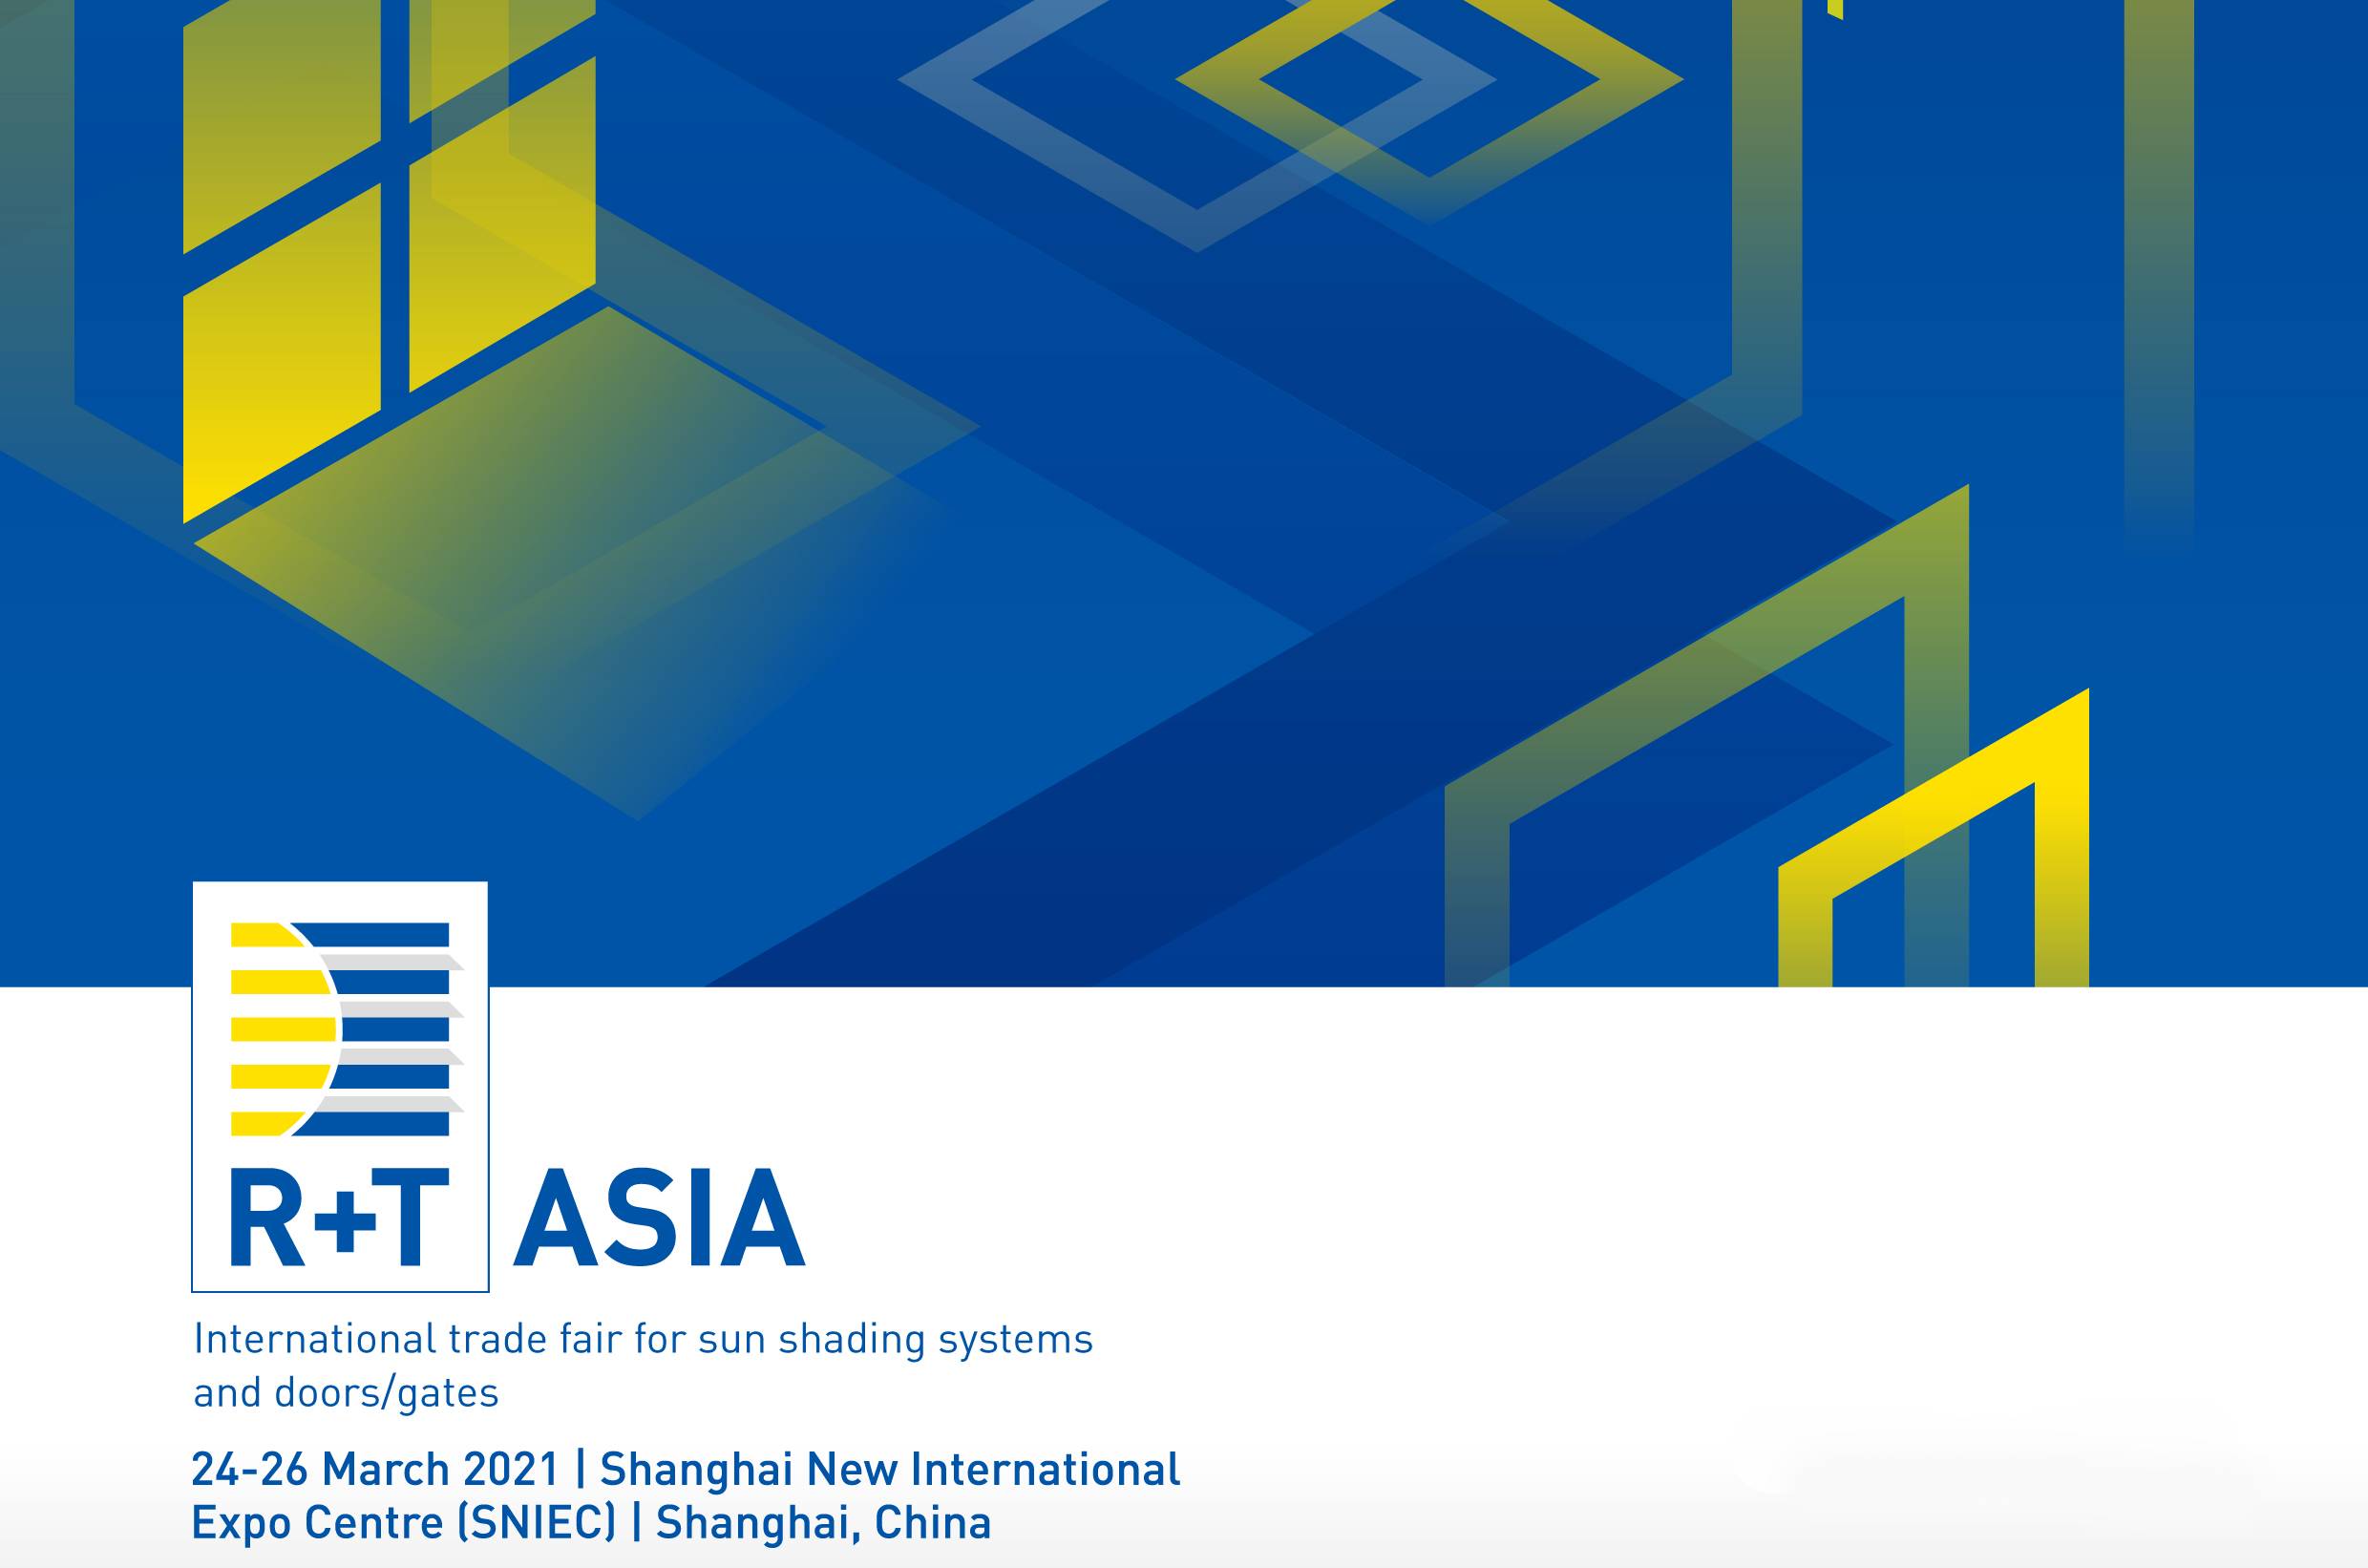 Welcome to R+T Asia 2021